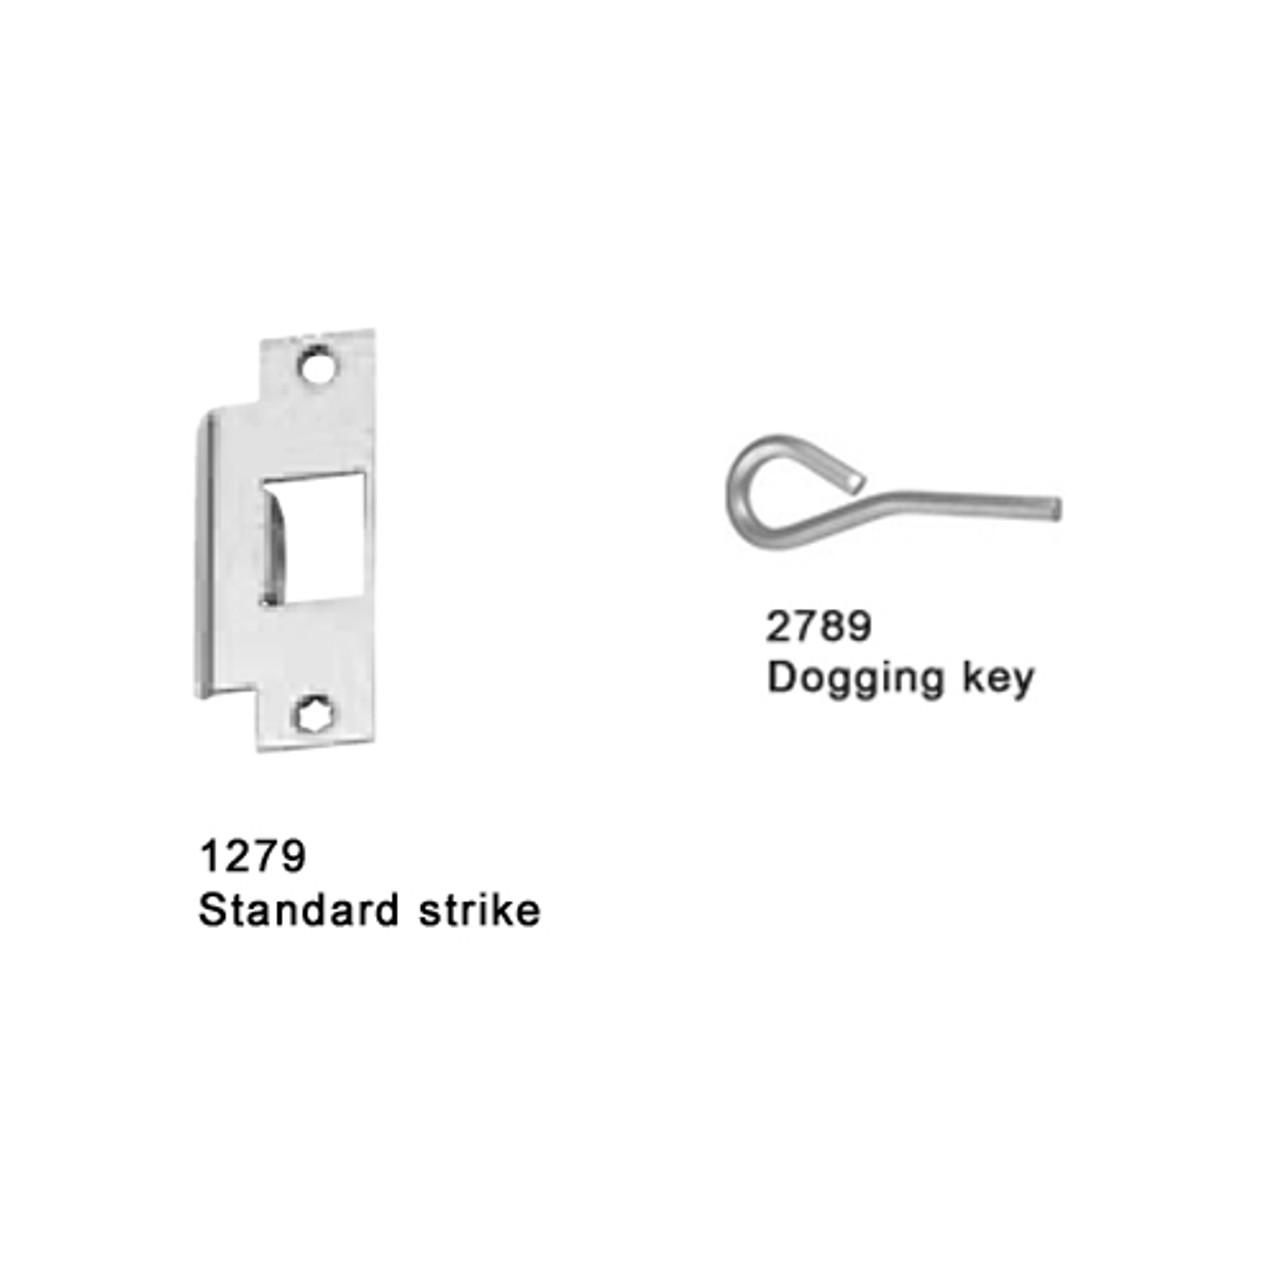 25-M-NL-US15-4-RHR Falcon 25 Series Mortise Lock Devices with 512NL Night Latch Trim in Satin Nickel